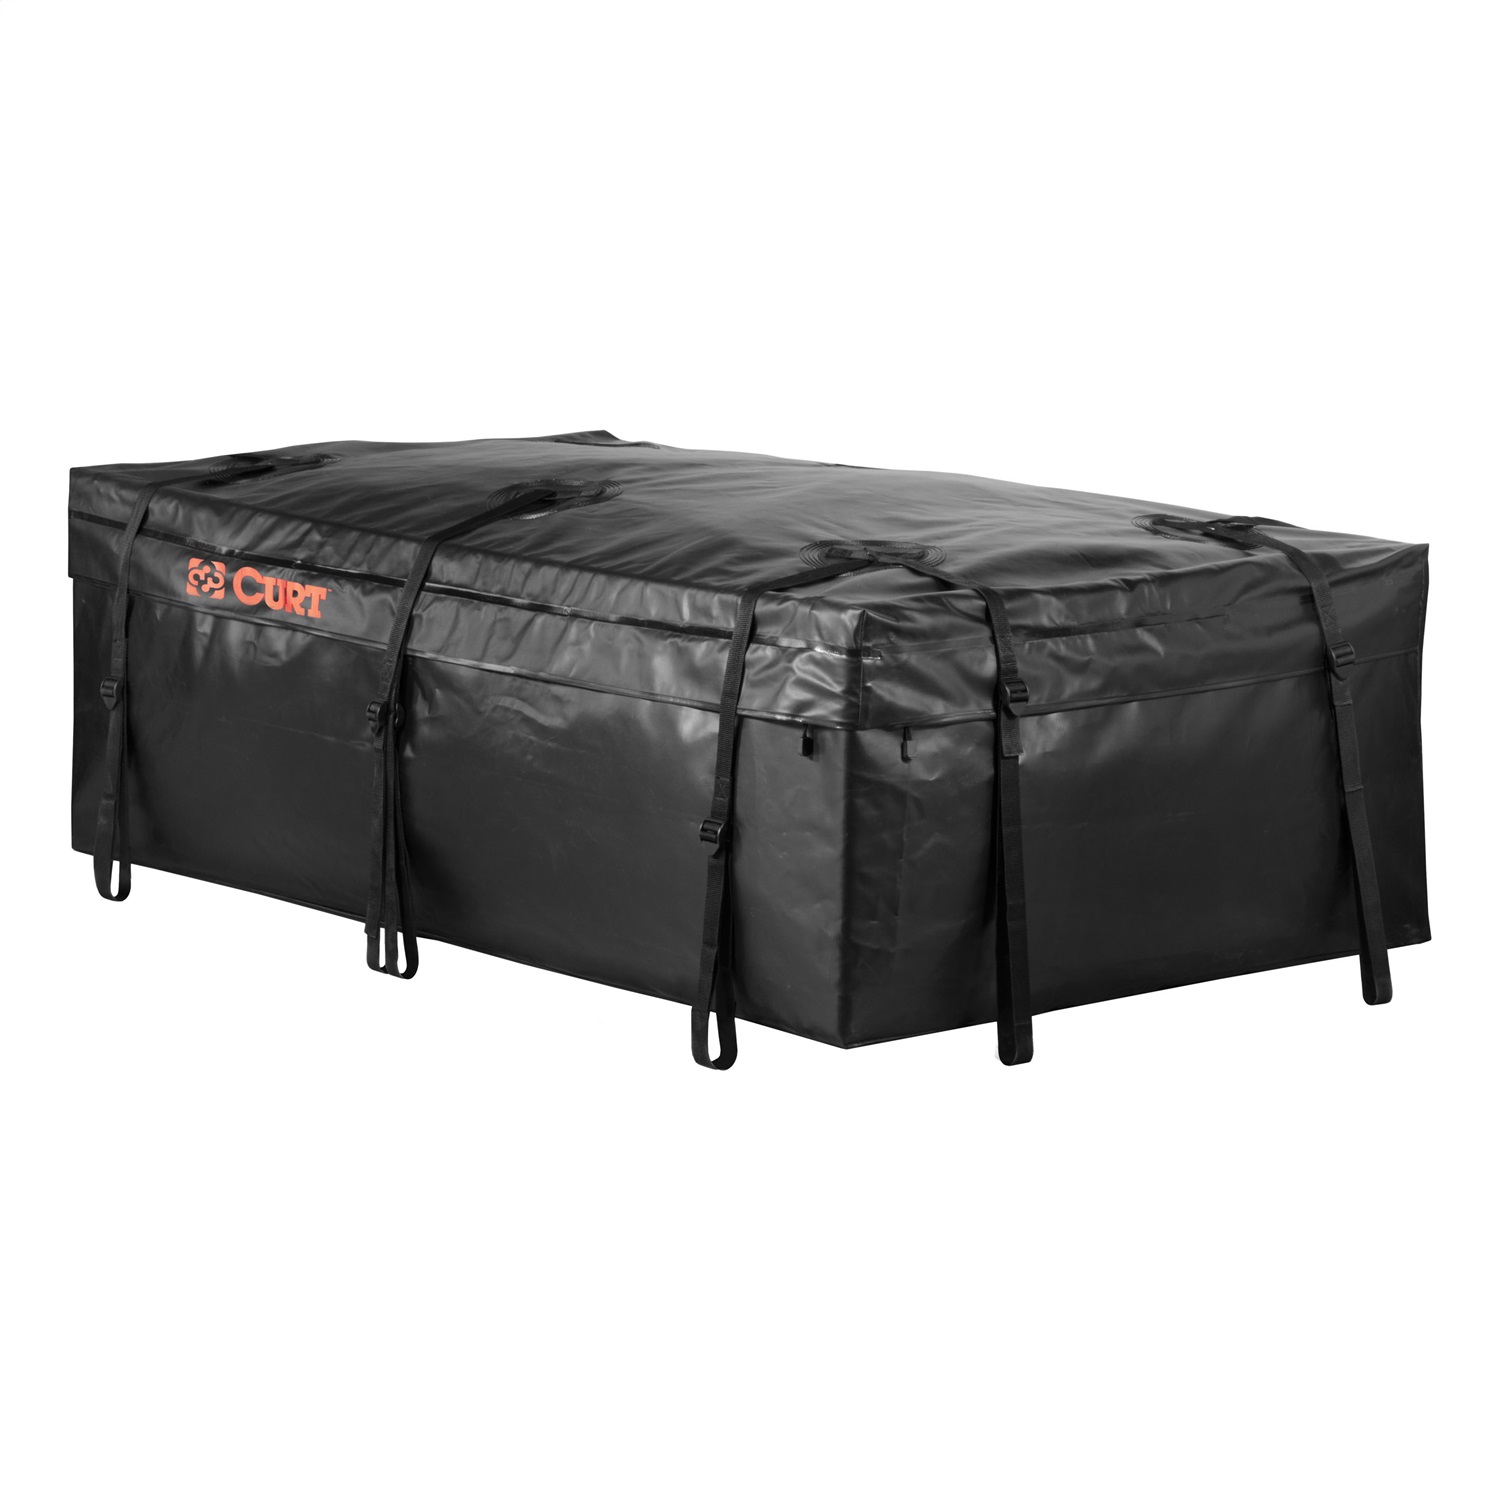 CURT Manufacturing CURT Manufacturing 18221 Waterproof Rooftop Carrier Cargo Bag  Fits